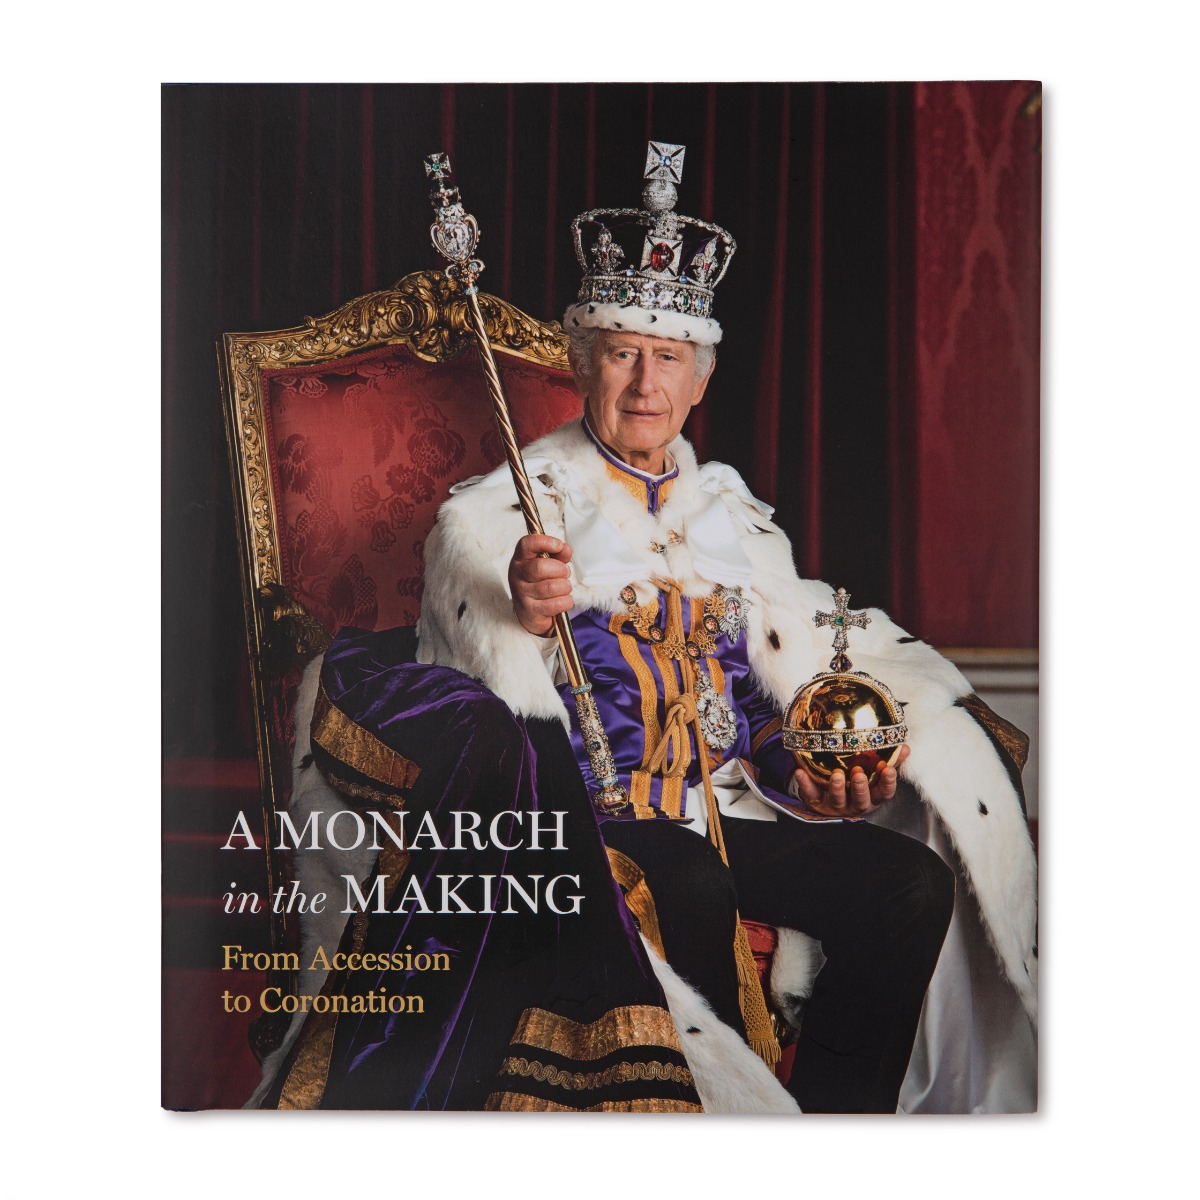 A Monarch In The Making: From Accession to Coronation